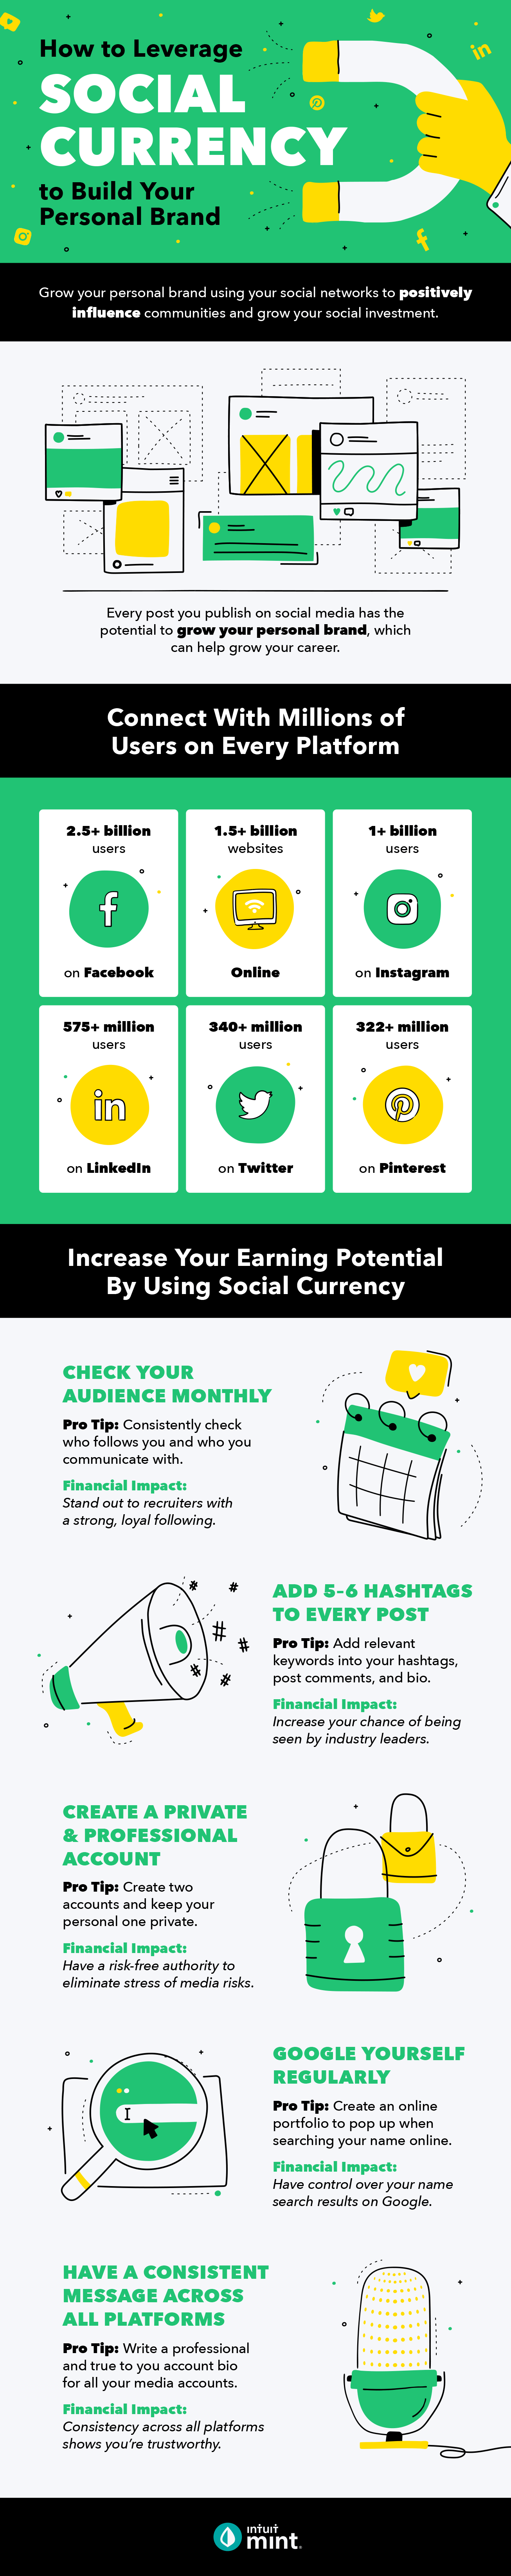 How to Leverage Social Currency to Build Your Personal Brand